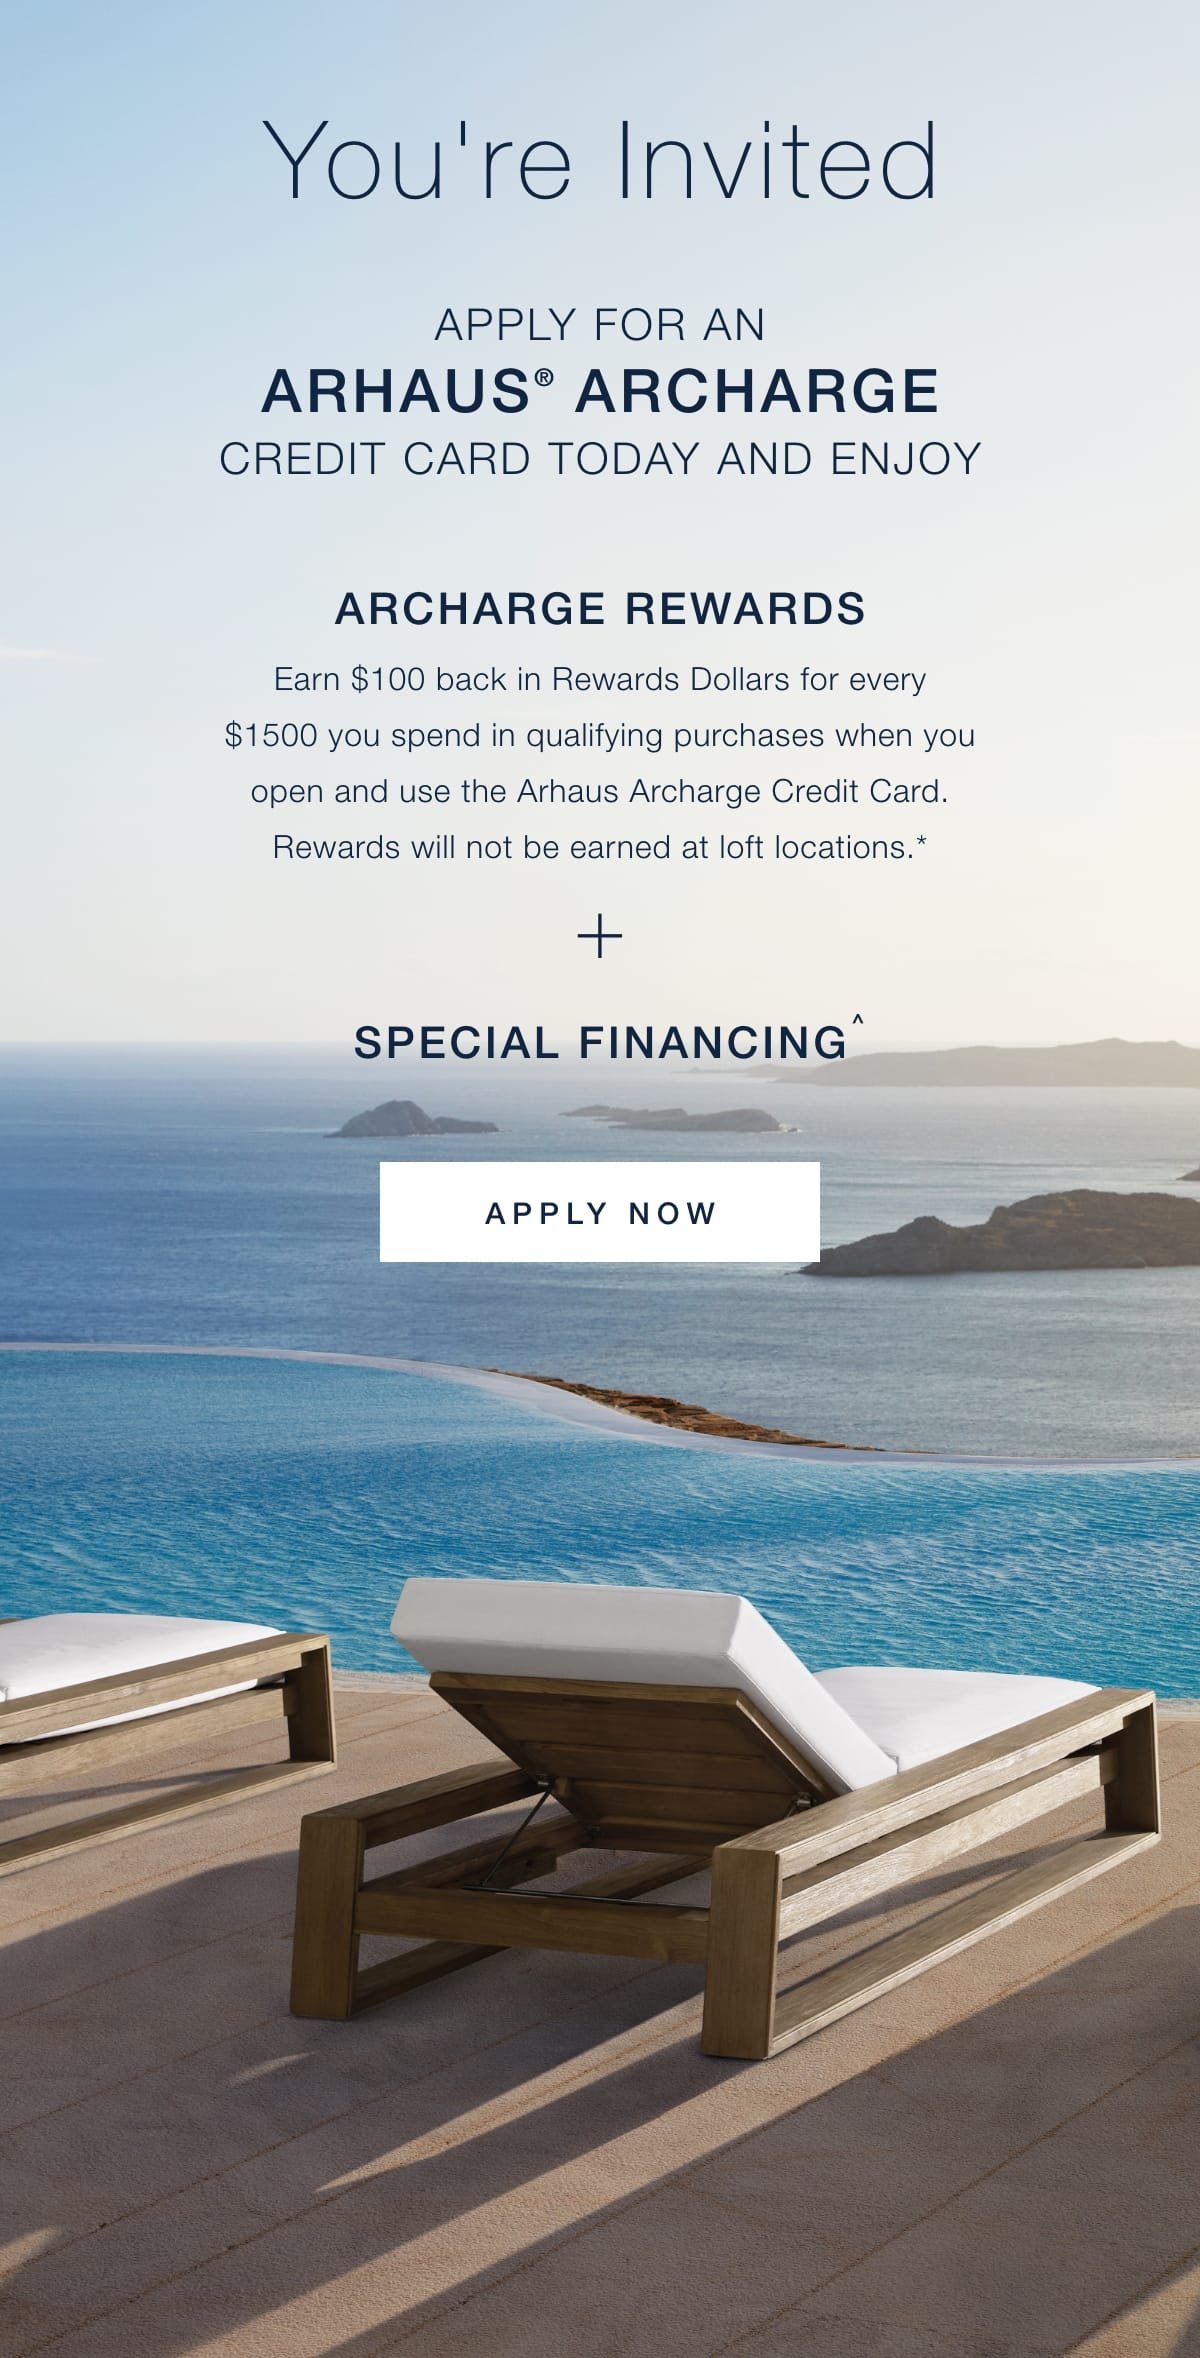 Apply today for an Archarge credit card